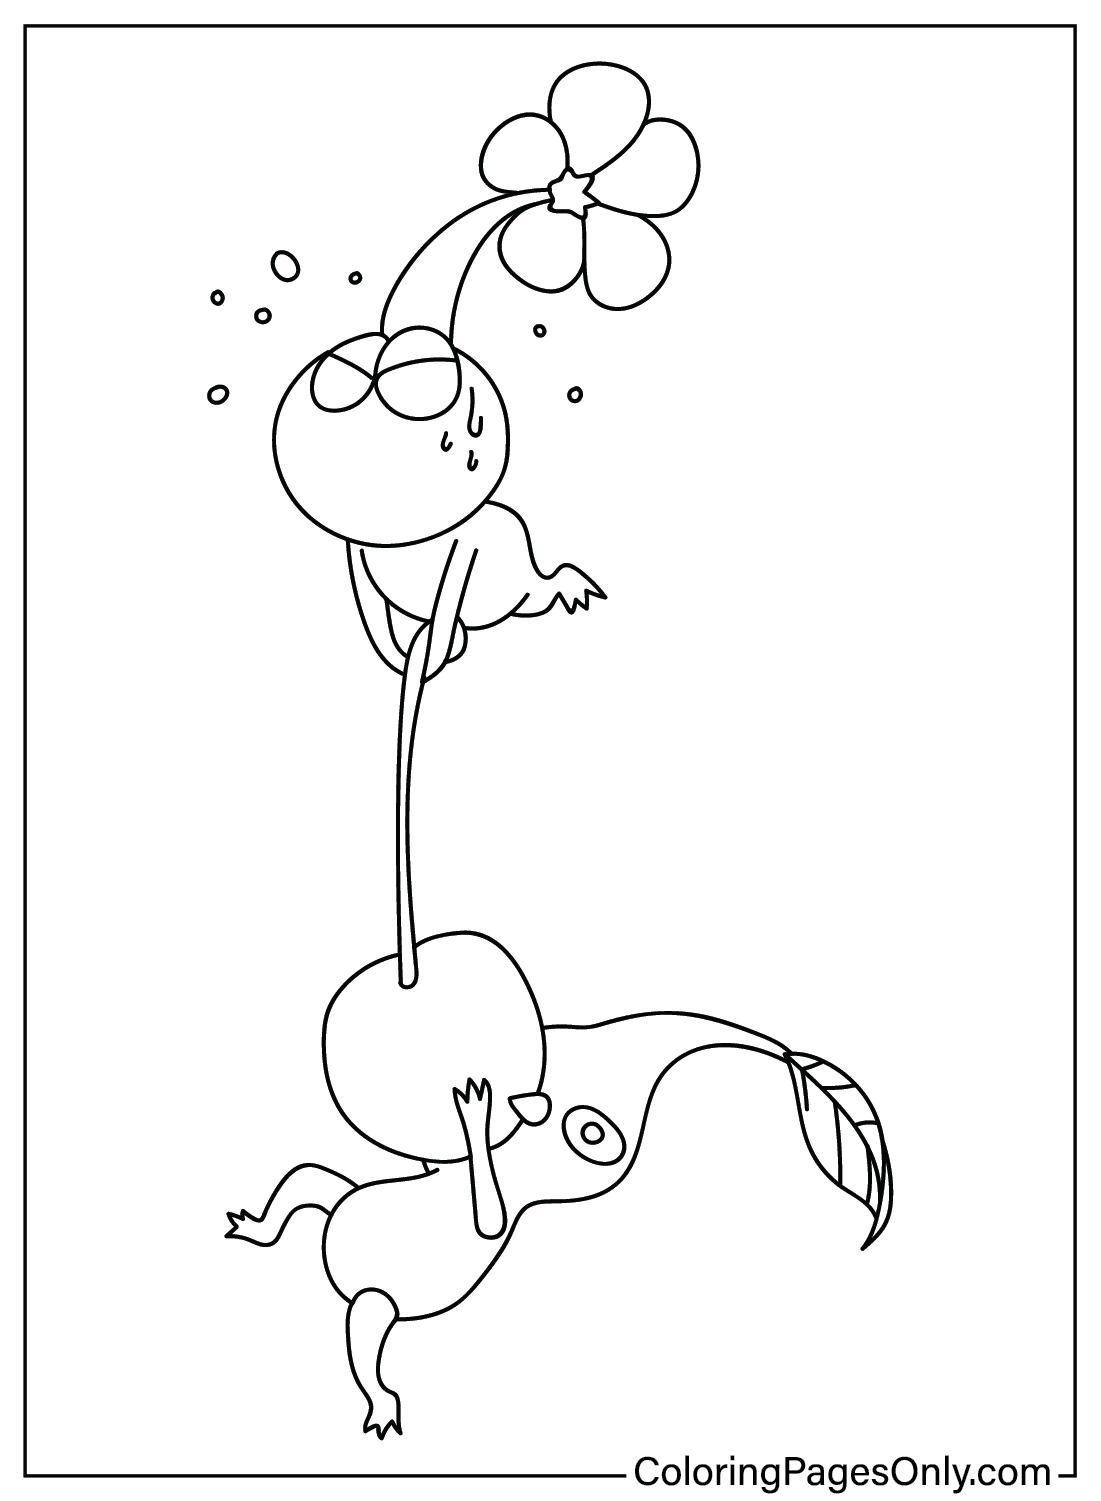 Drawing Pikmin Coloring Page from Pikmin